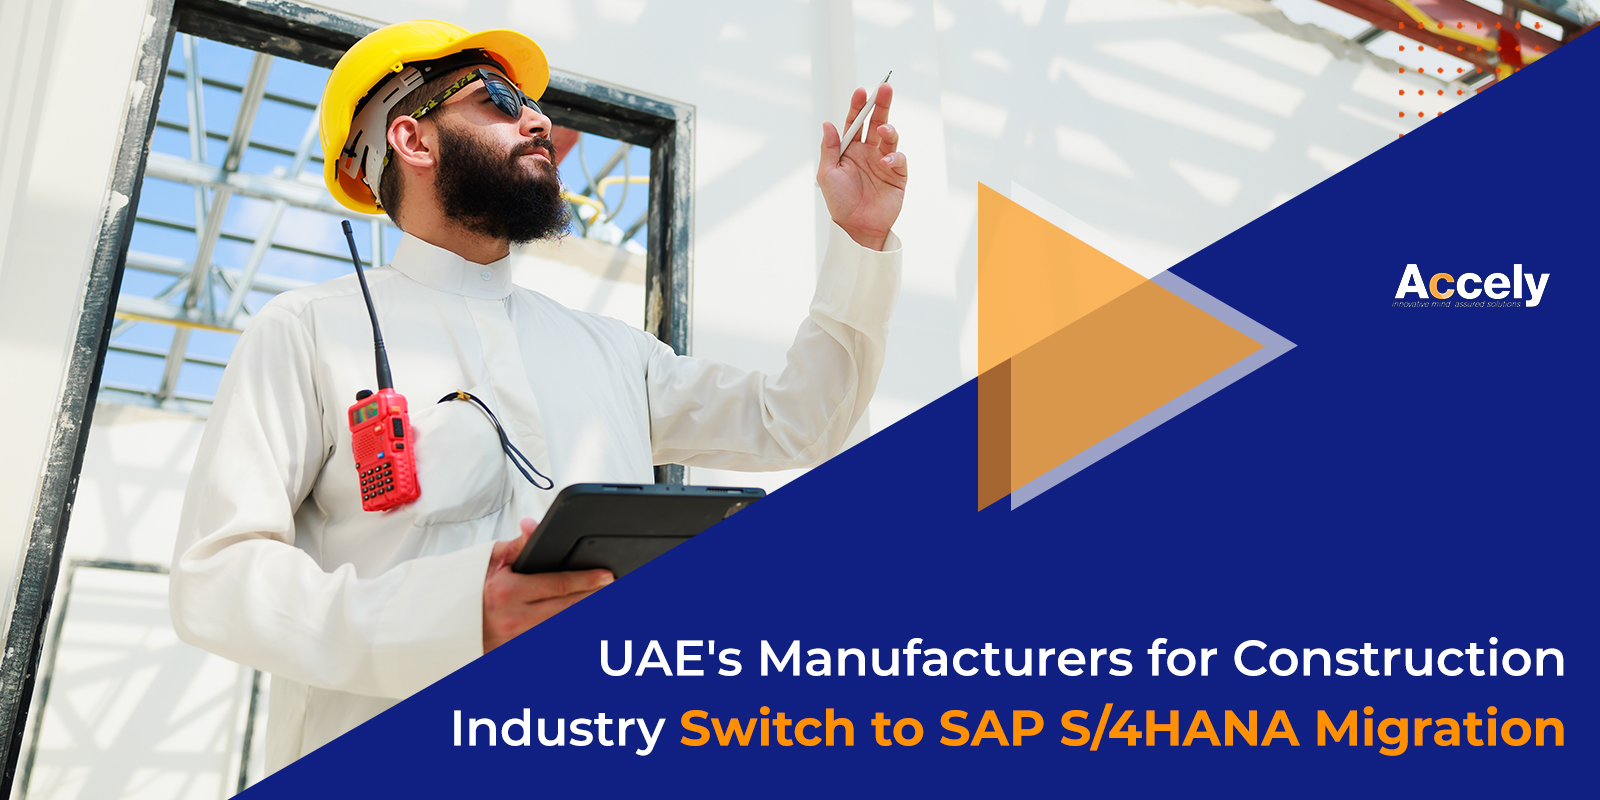 UAE's Manufacturers for Construction Industry Switch to SAP S/4HANA Migration